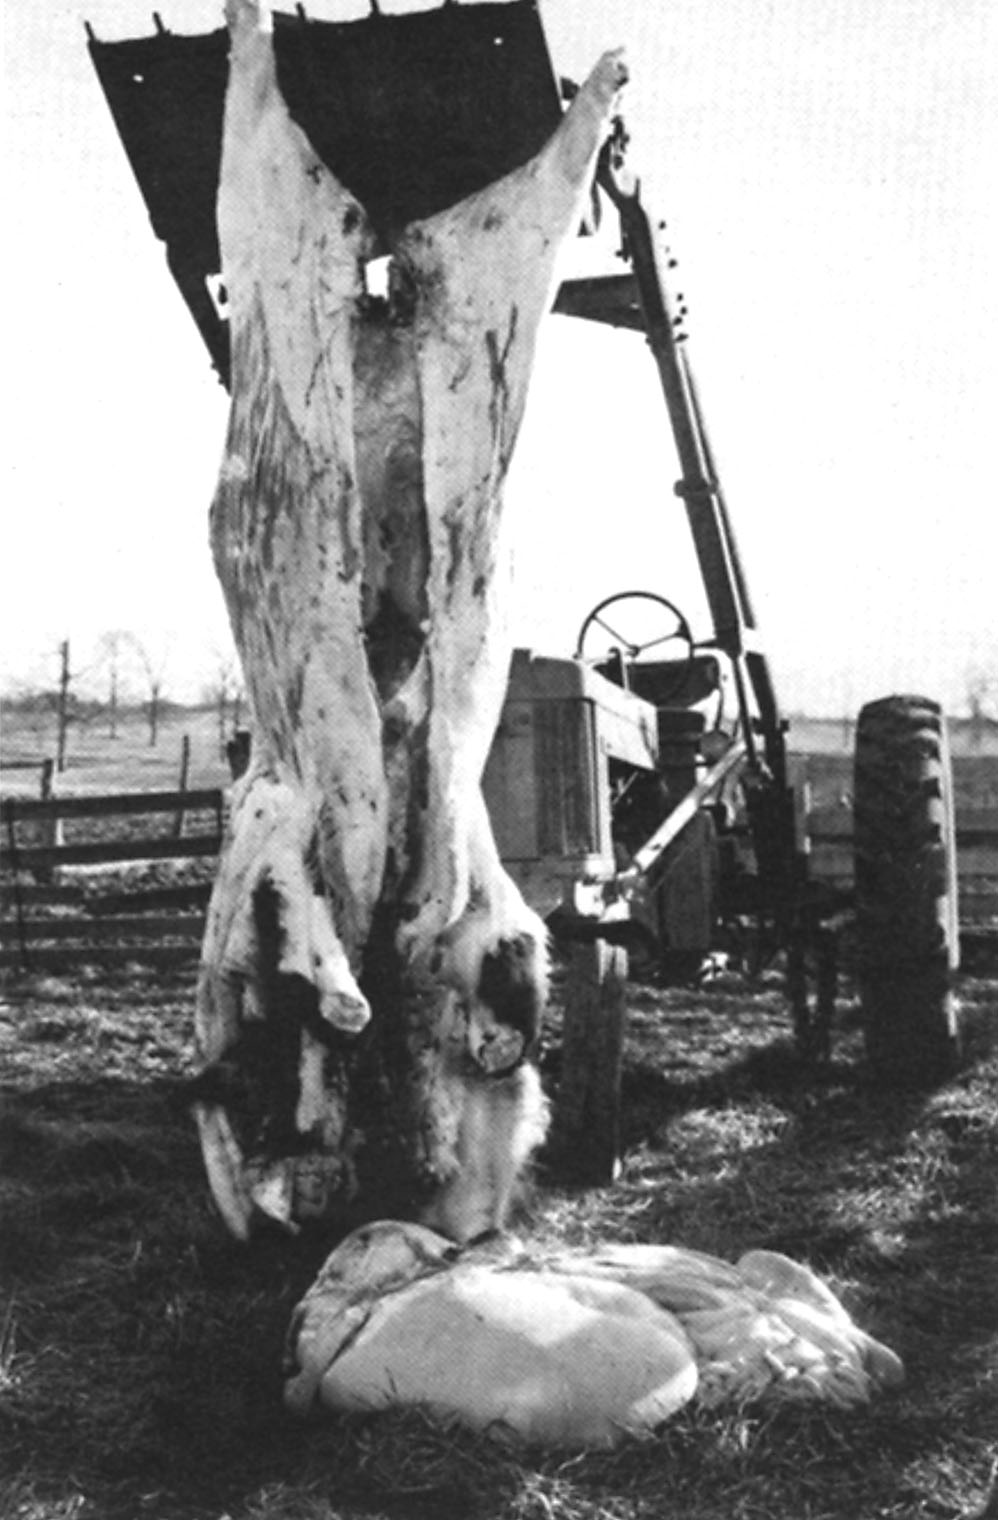 Carcass hoisted with head clearing the ground, ready to complete skinning and to remove the head.